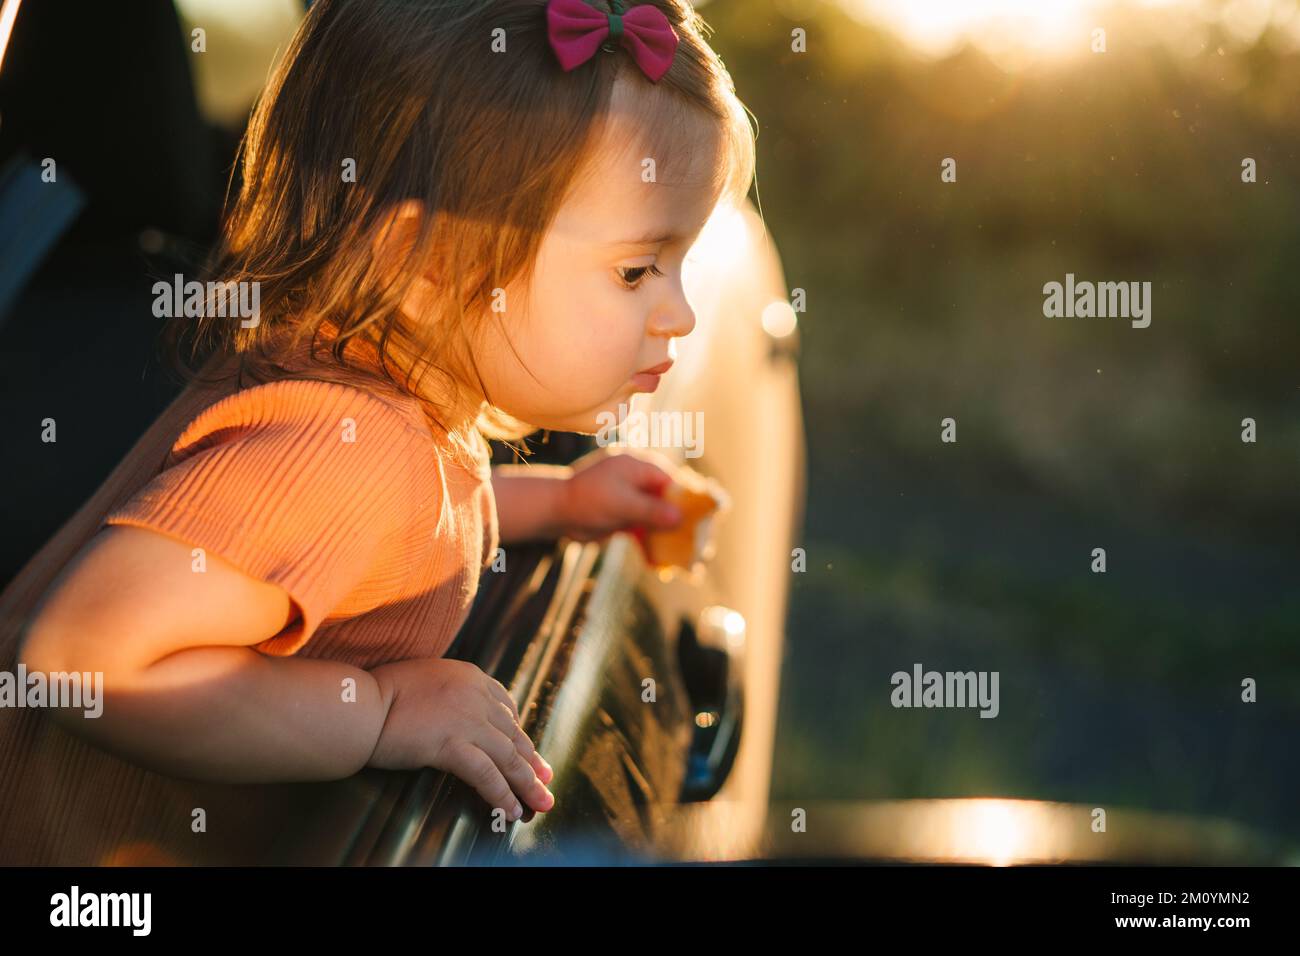 Adorable little girl sticking her head out the car window looking forward for a roadtrip or travel. Happy family. Nature summer. Summer vacation fun Stock Photo